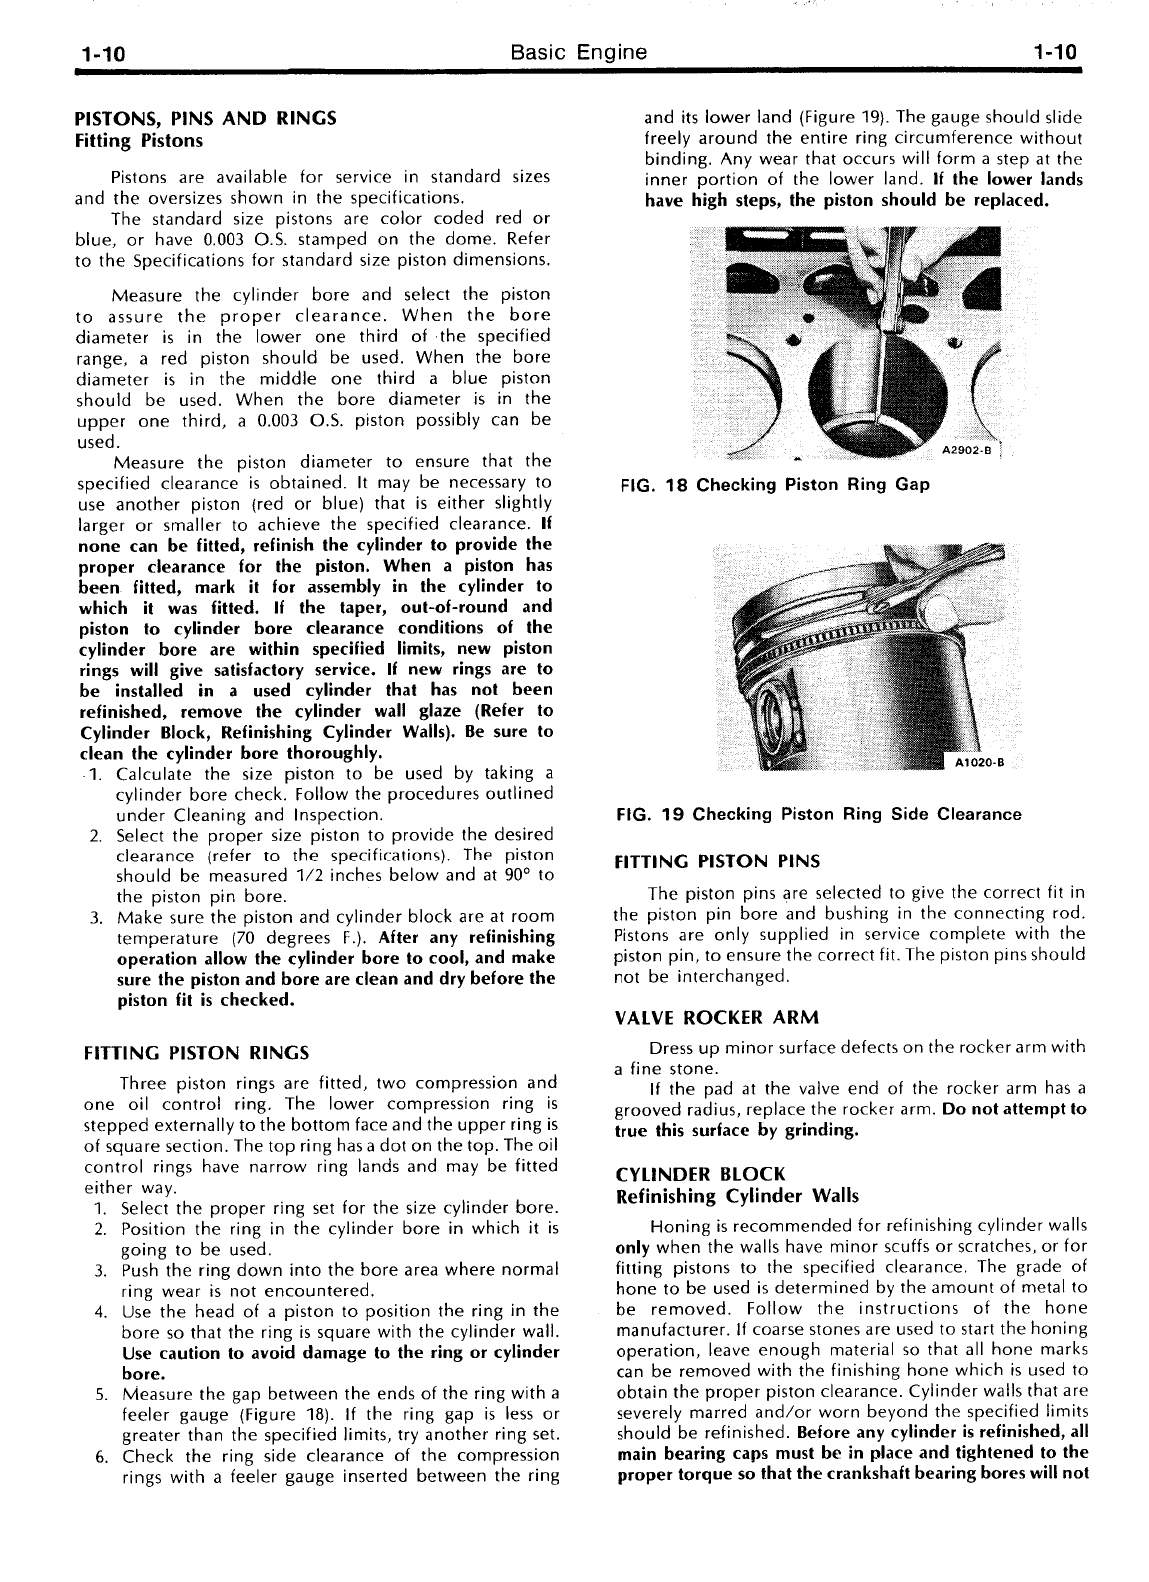 194 216 Ford LSG 423 2.3L Industrial Engine Service Manual (May1986)